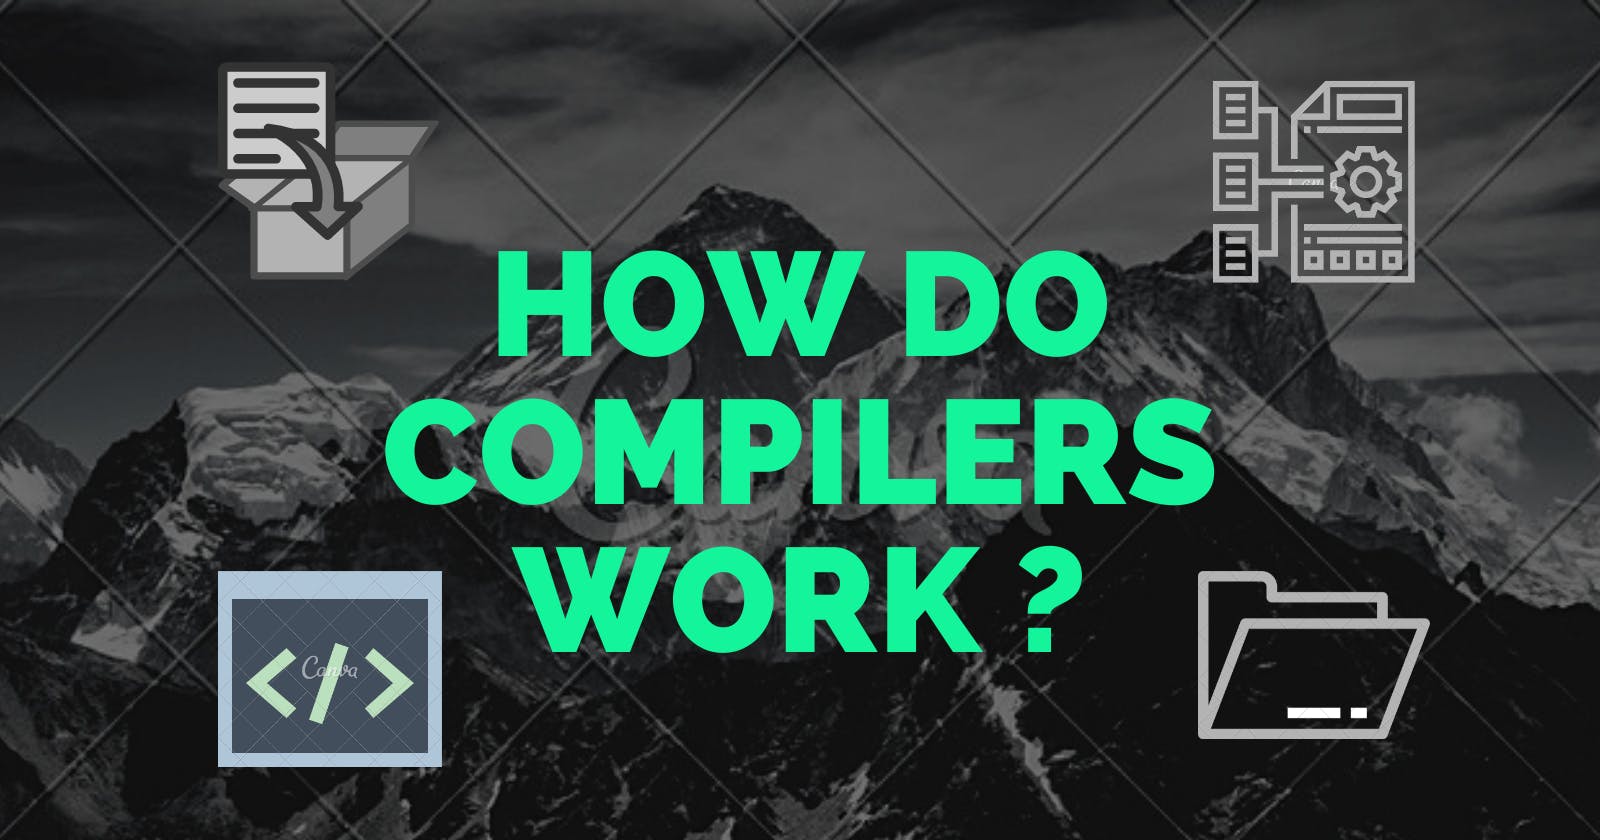 How do Compilers work?